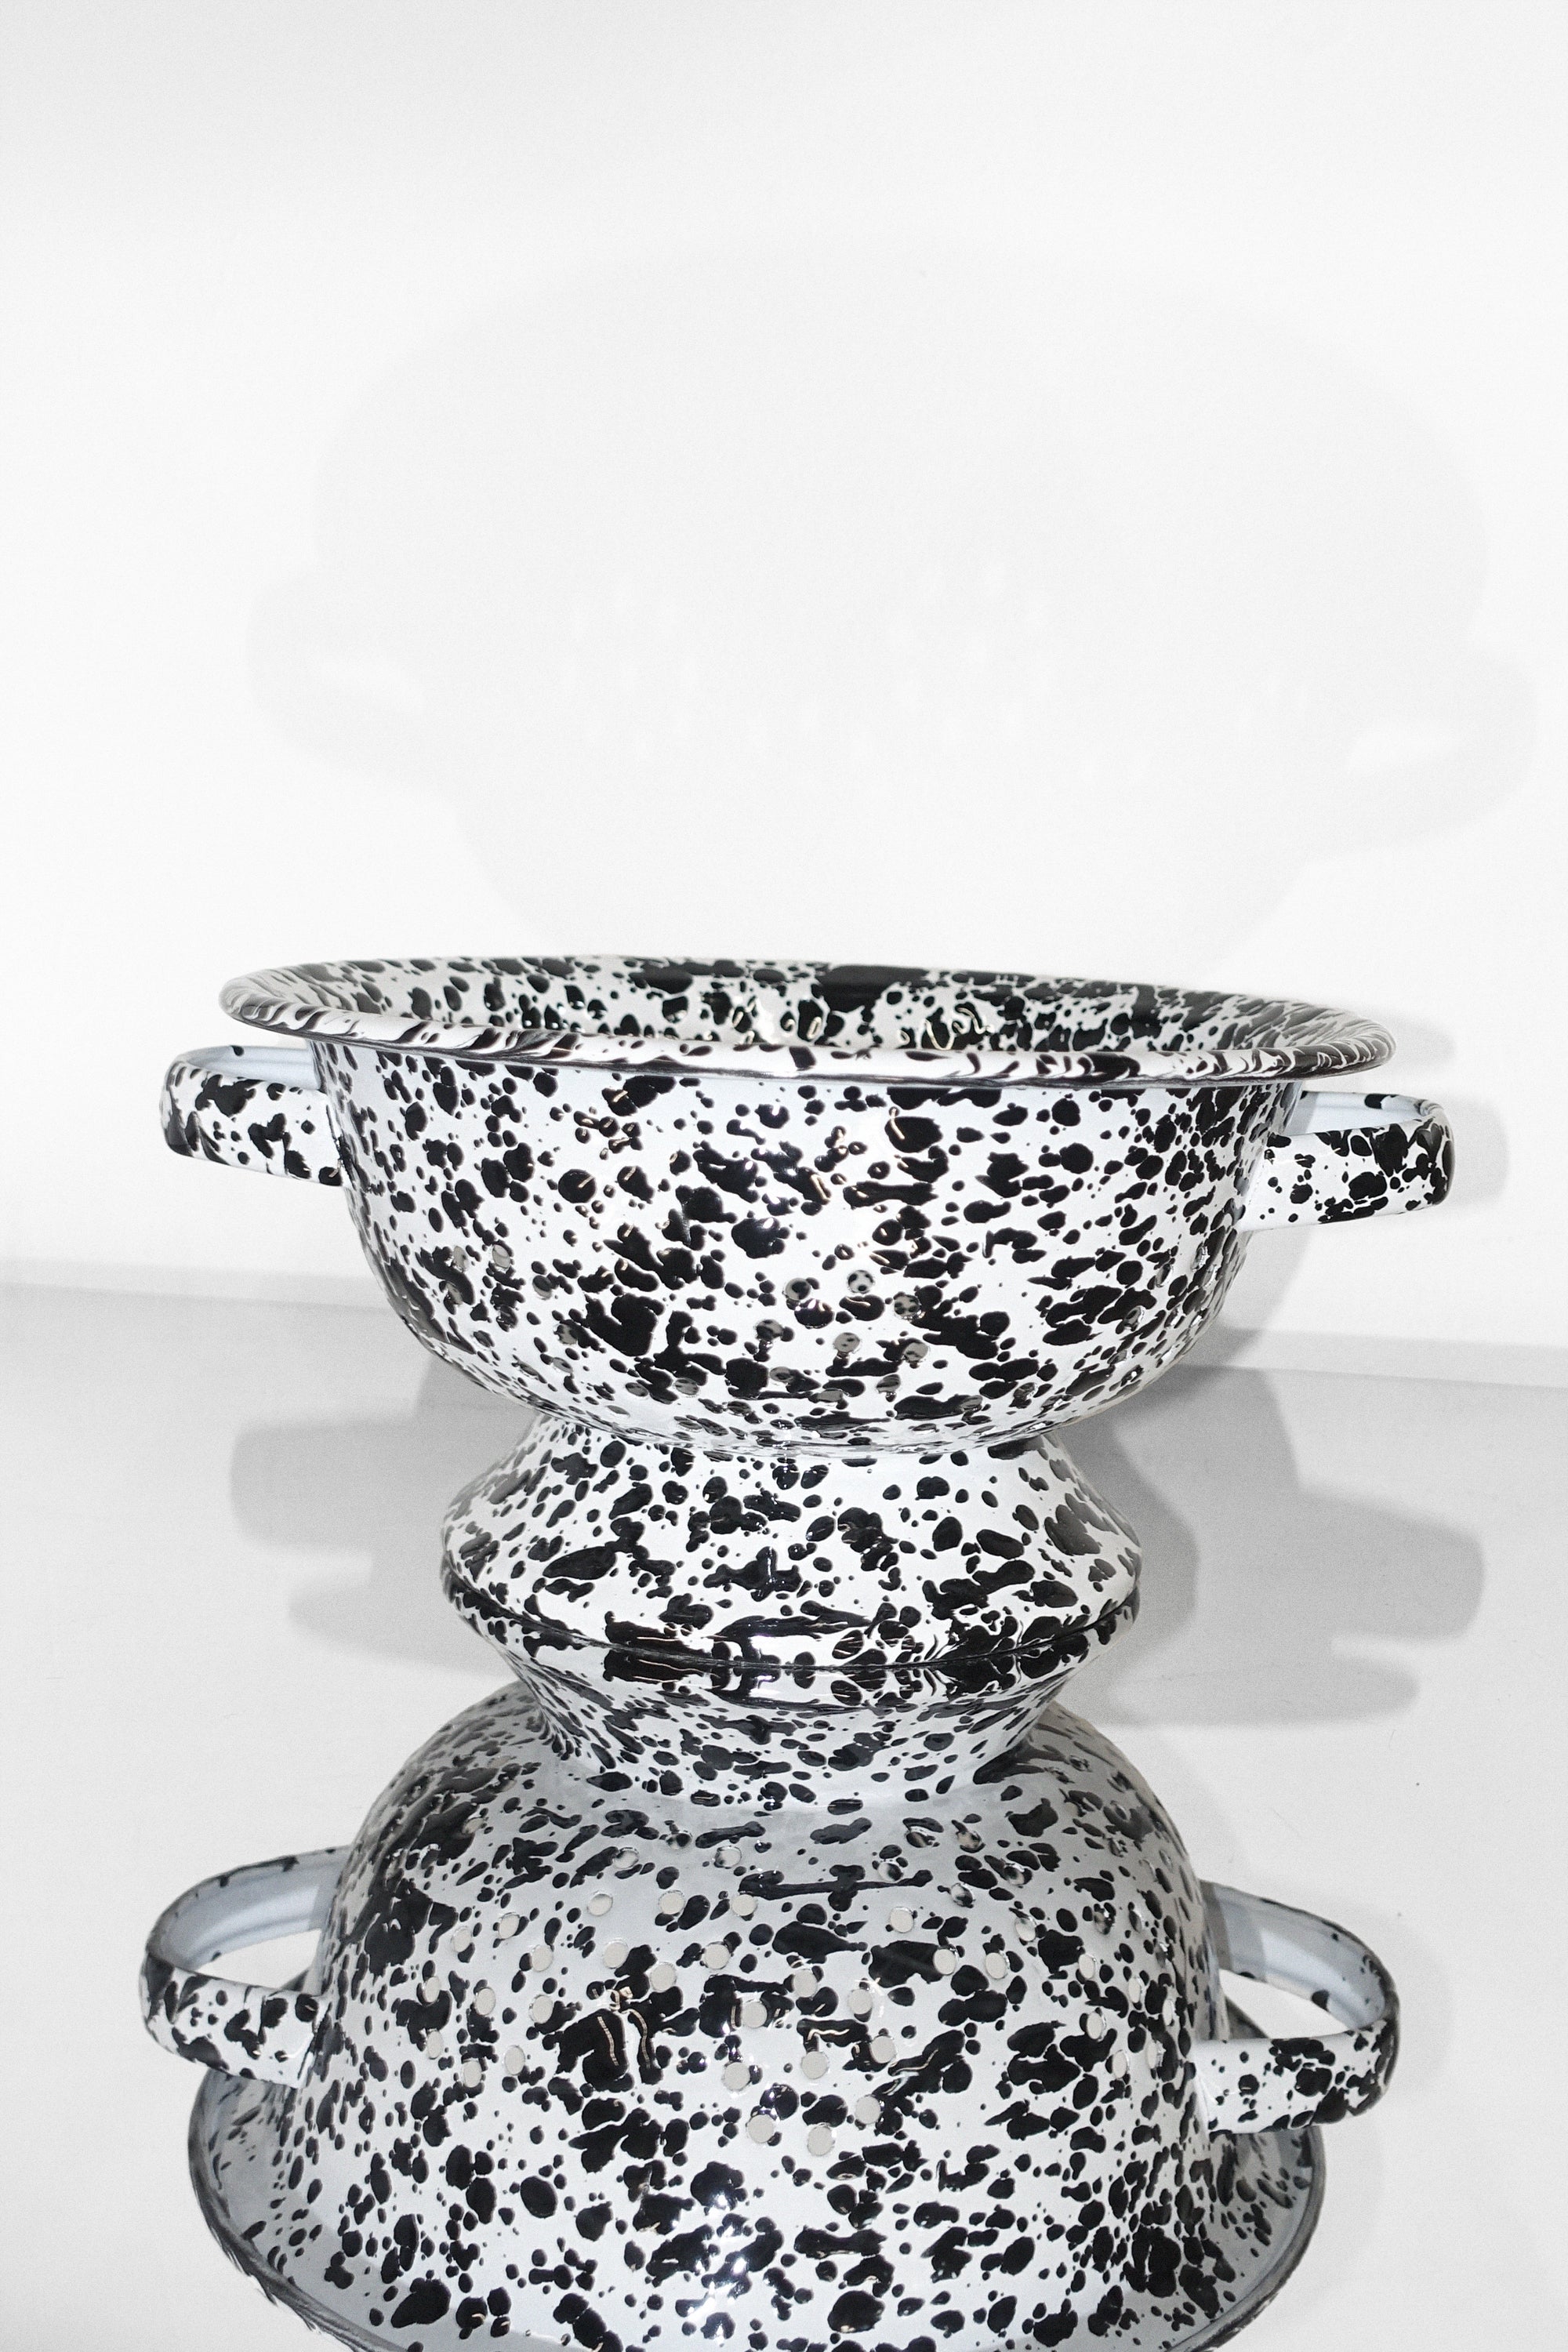 Small Berry Colander in Black Splatter by Crow Canyon Home